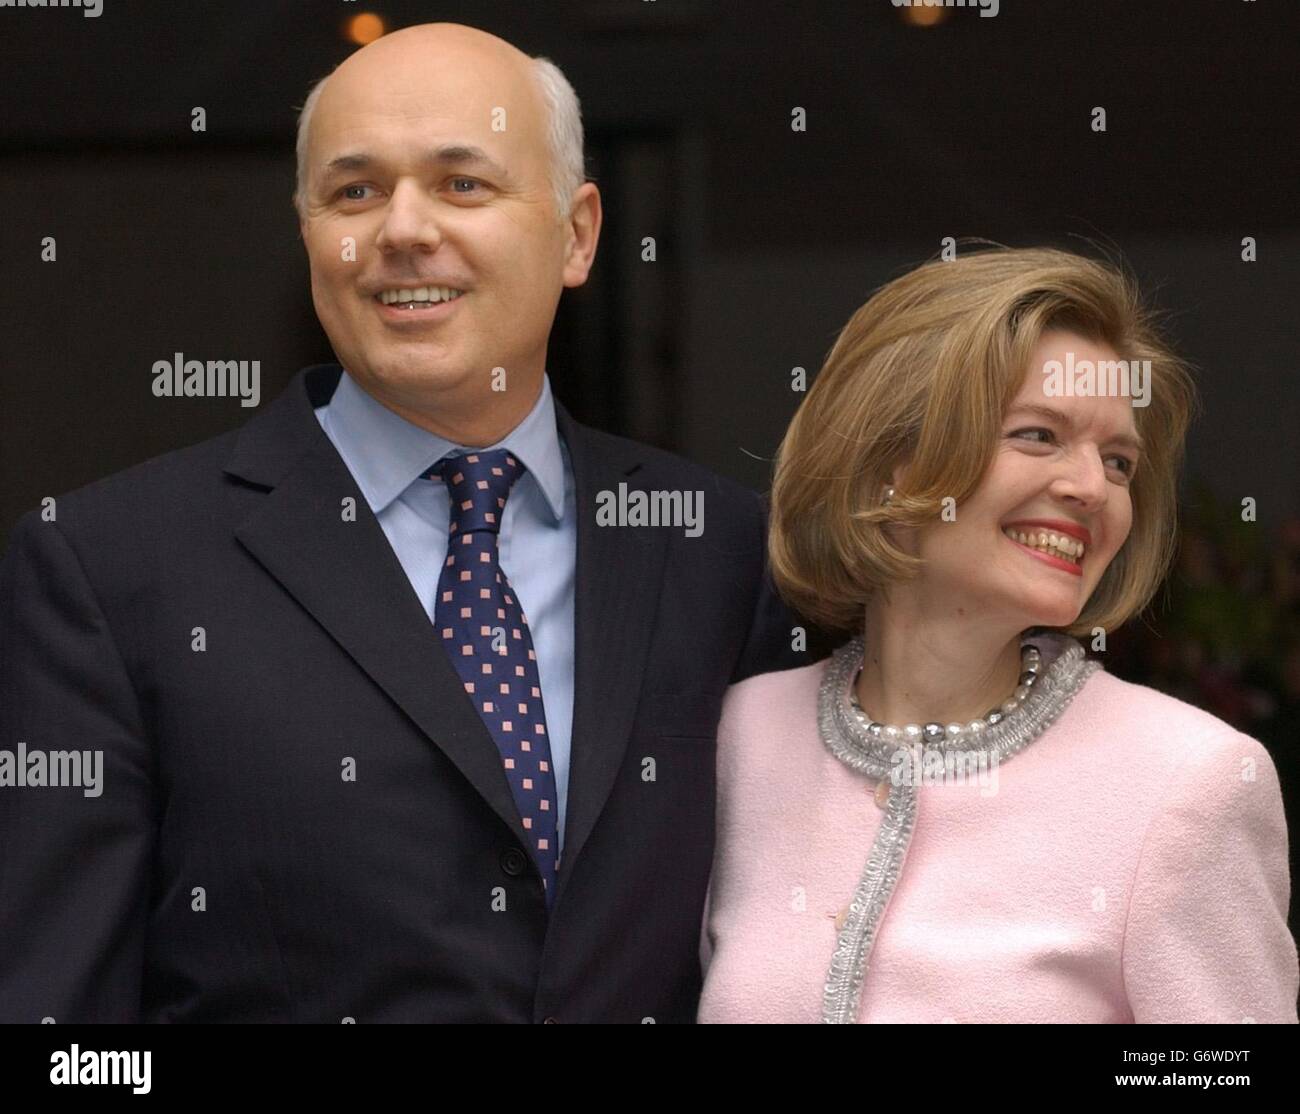 Conservative MP and former leader of the opposition Iain Duncan Smith speaks to the media with his wife Betsy in central London. Mr Duncan Smith has been cleared of wrongdoing over the 'Betsygate' row after the Committee on Standards and Privileges dismissed complaints that he improperly employed his wife as a secretary. Stock Photo